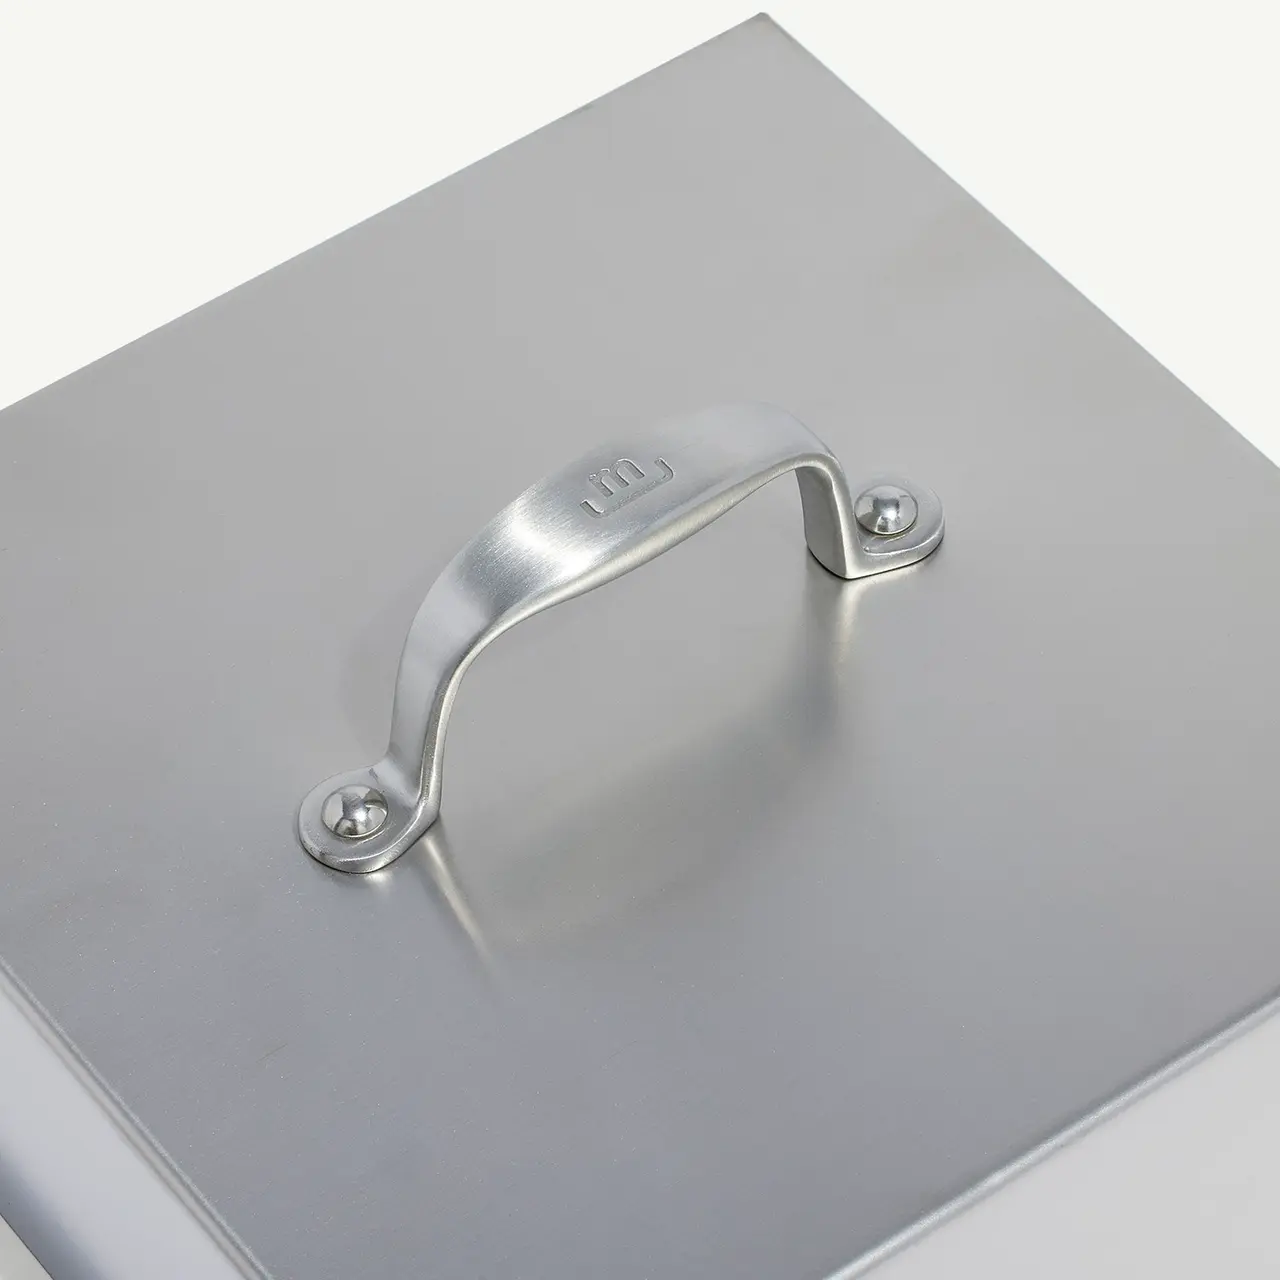 A silver metal case with a handle on top, presented against a white background.